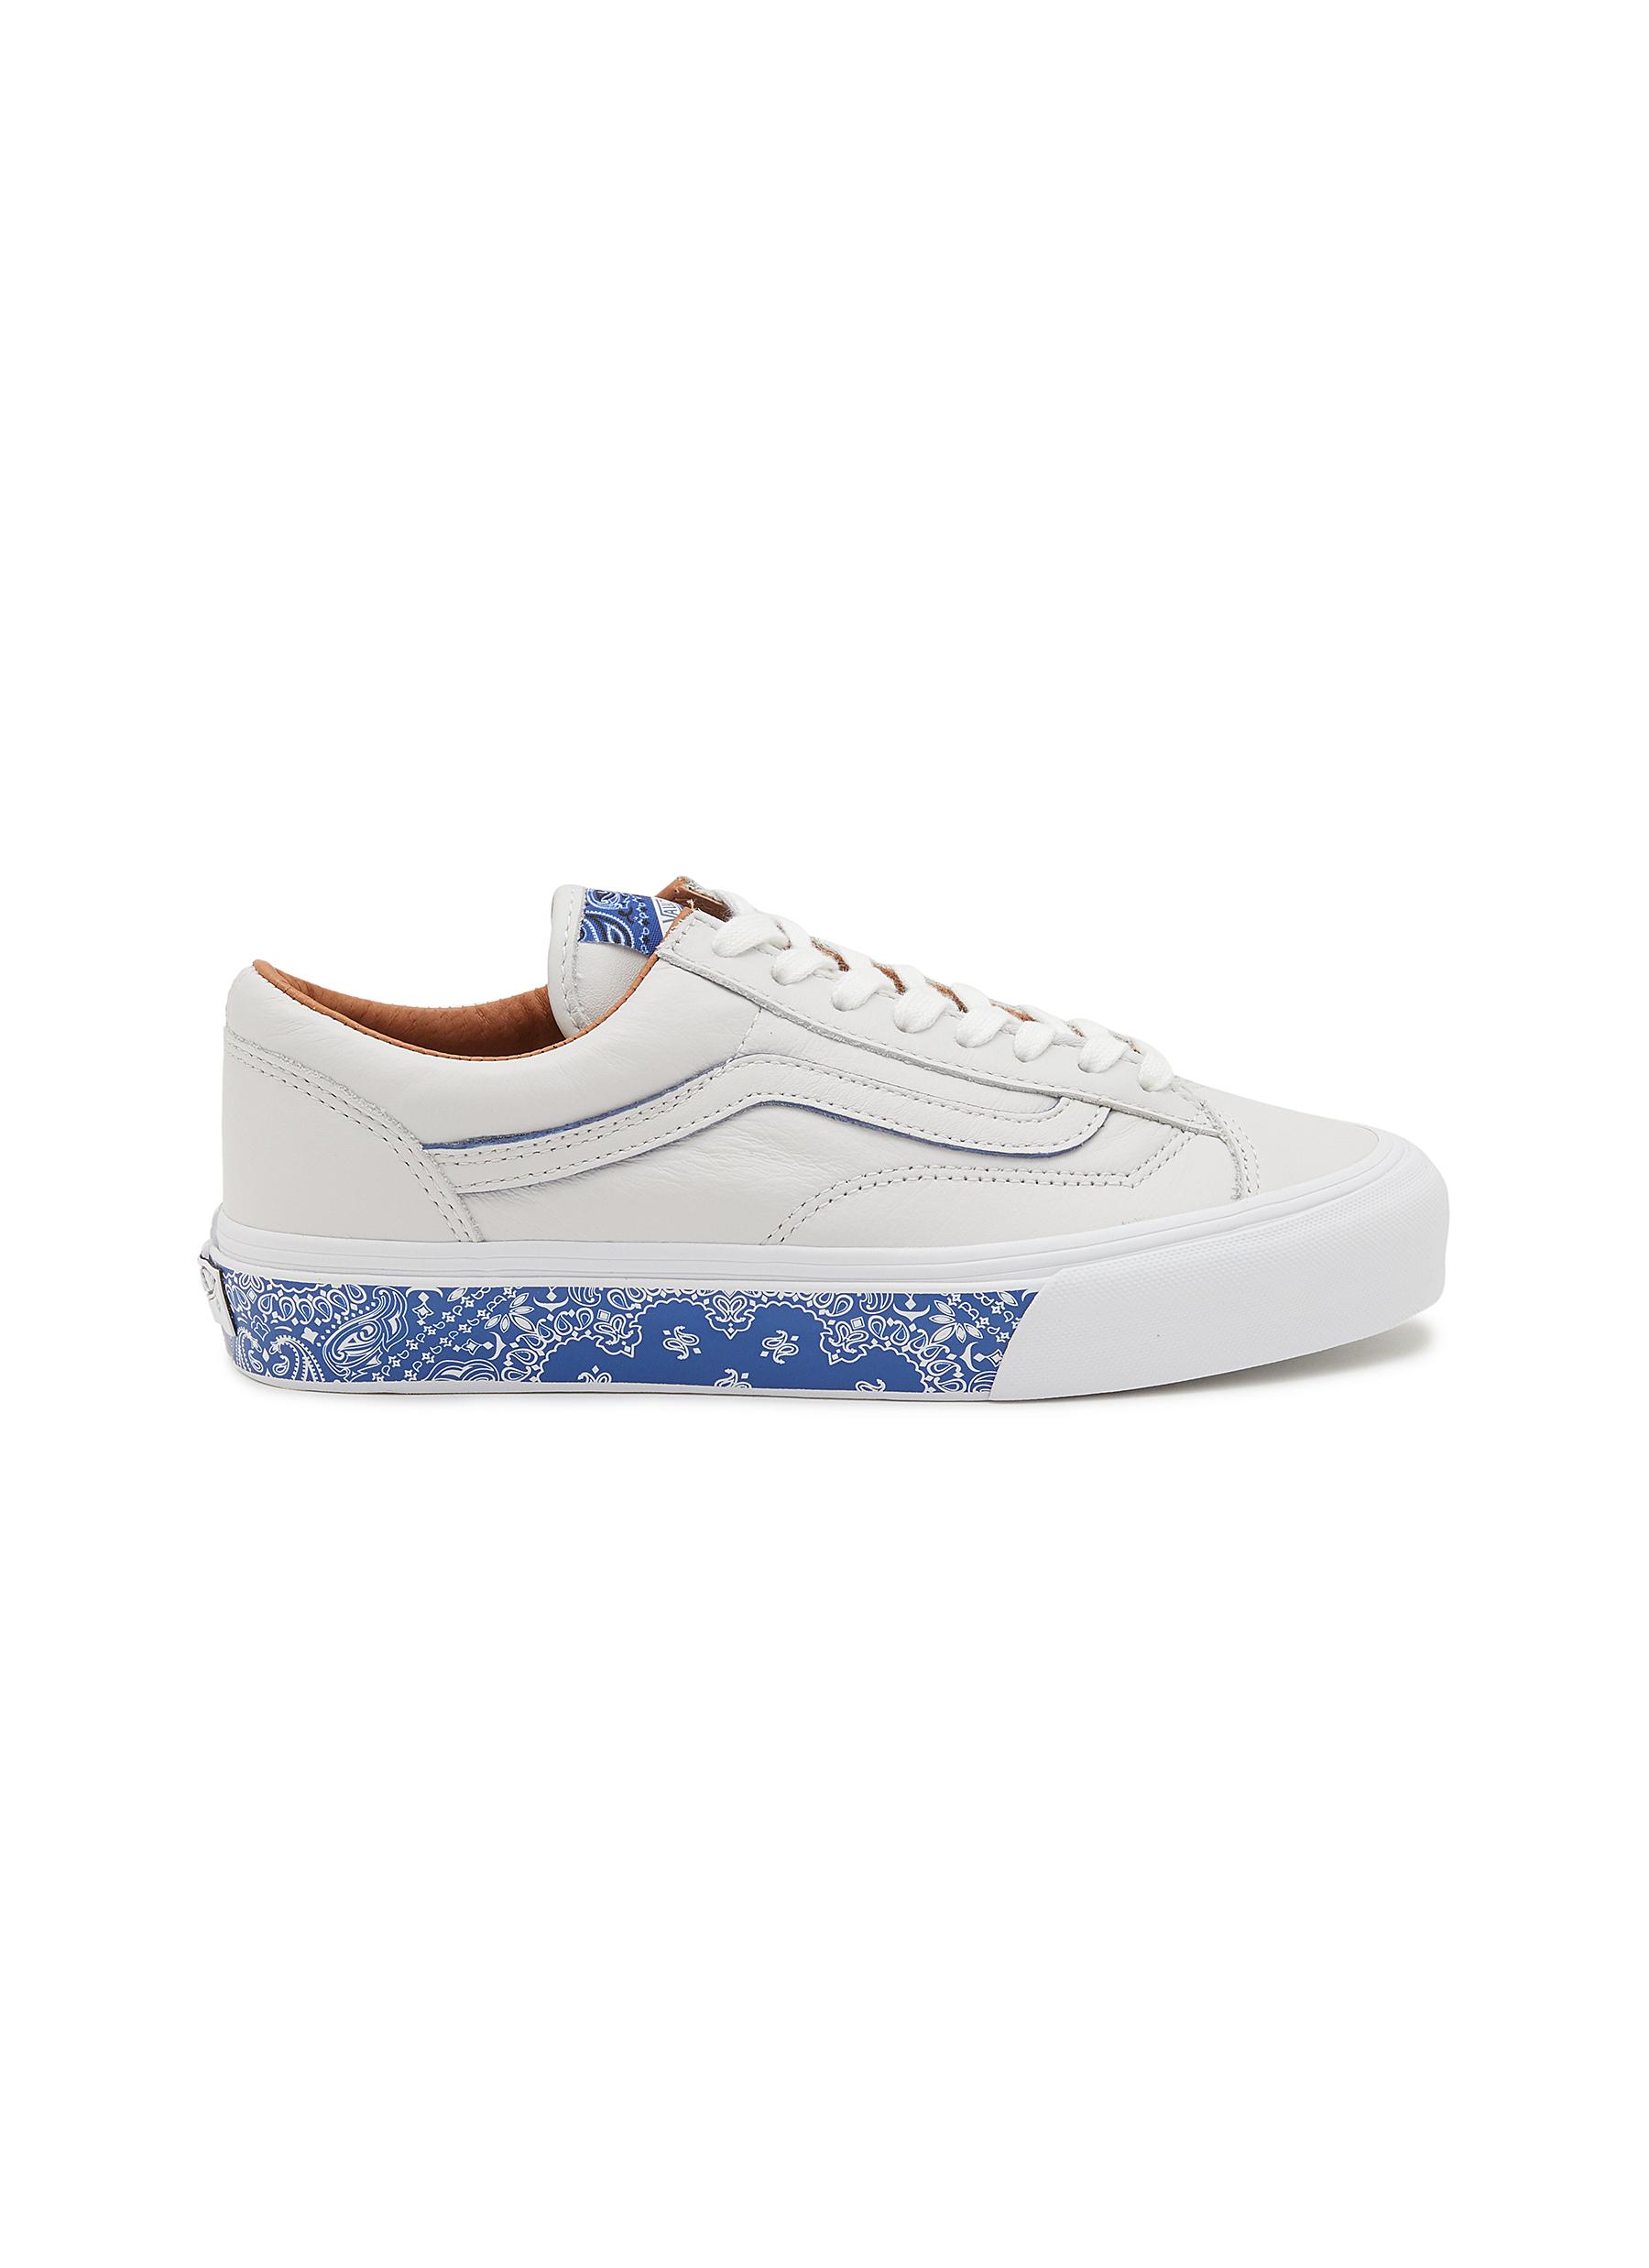 VANS | 'STYLE 36 VLT LX' LOW TOP LACE UP BANDANA SOLE SNEAKERS | Women Crawford